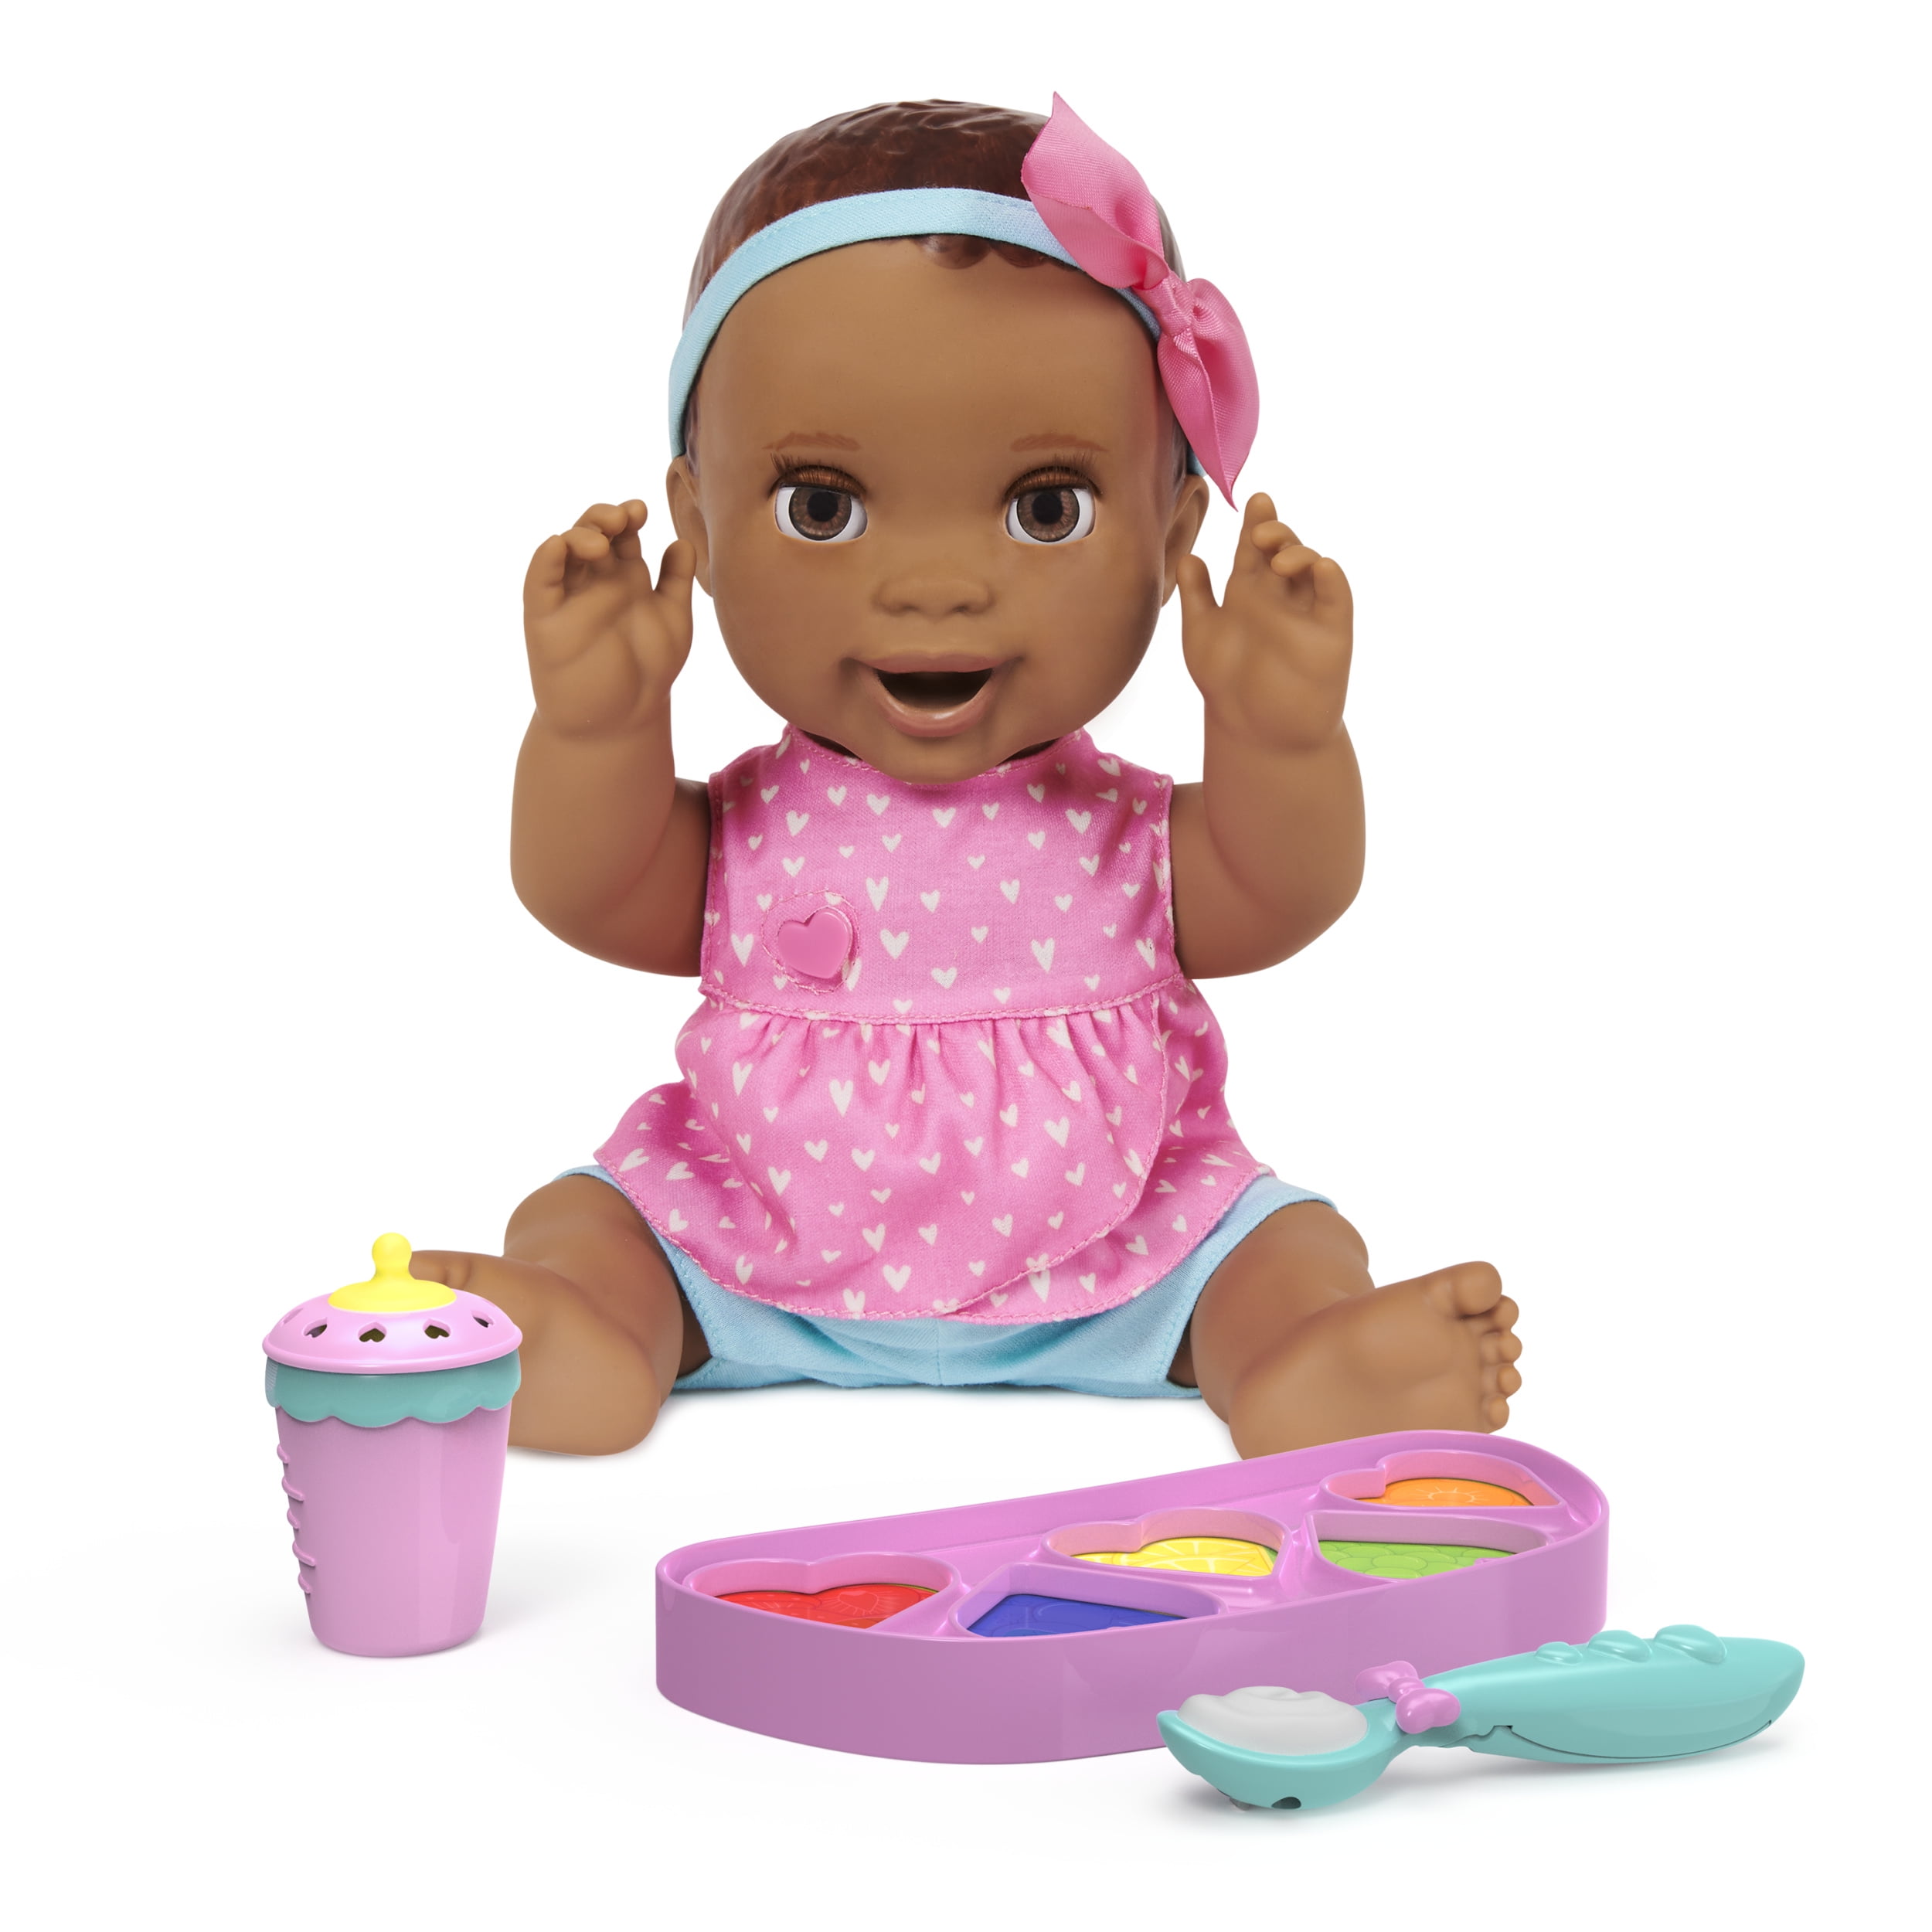 6060101 Interactive Feeding Baby Doll Mealtime Magic Maya Recognizes Over 50 Foods with Lifelike Reactions and Over 70 Sounds